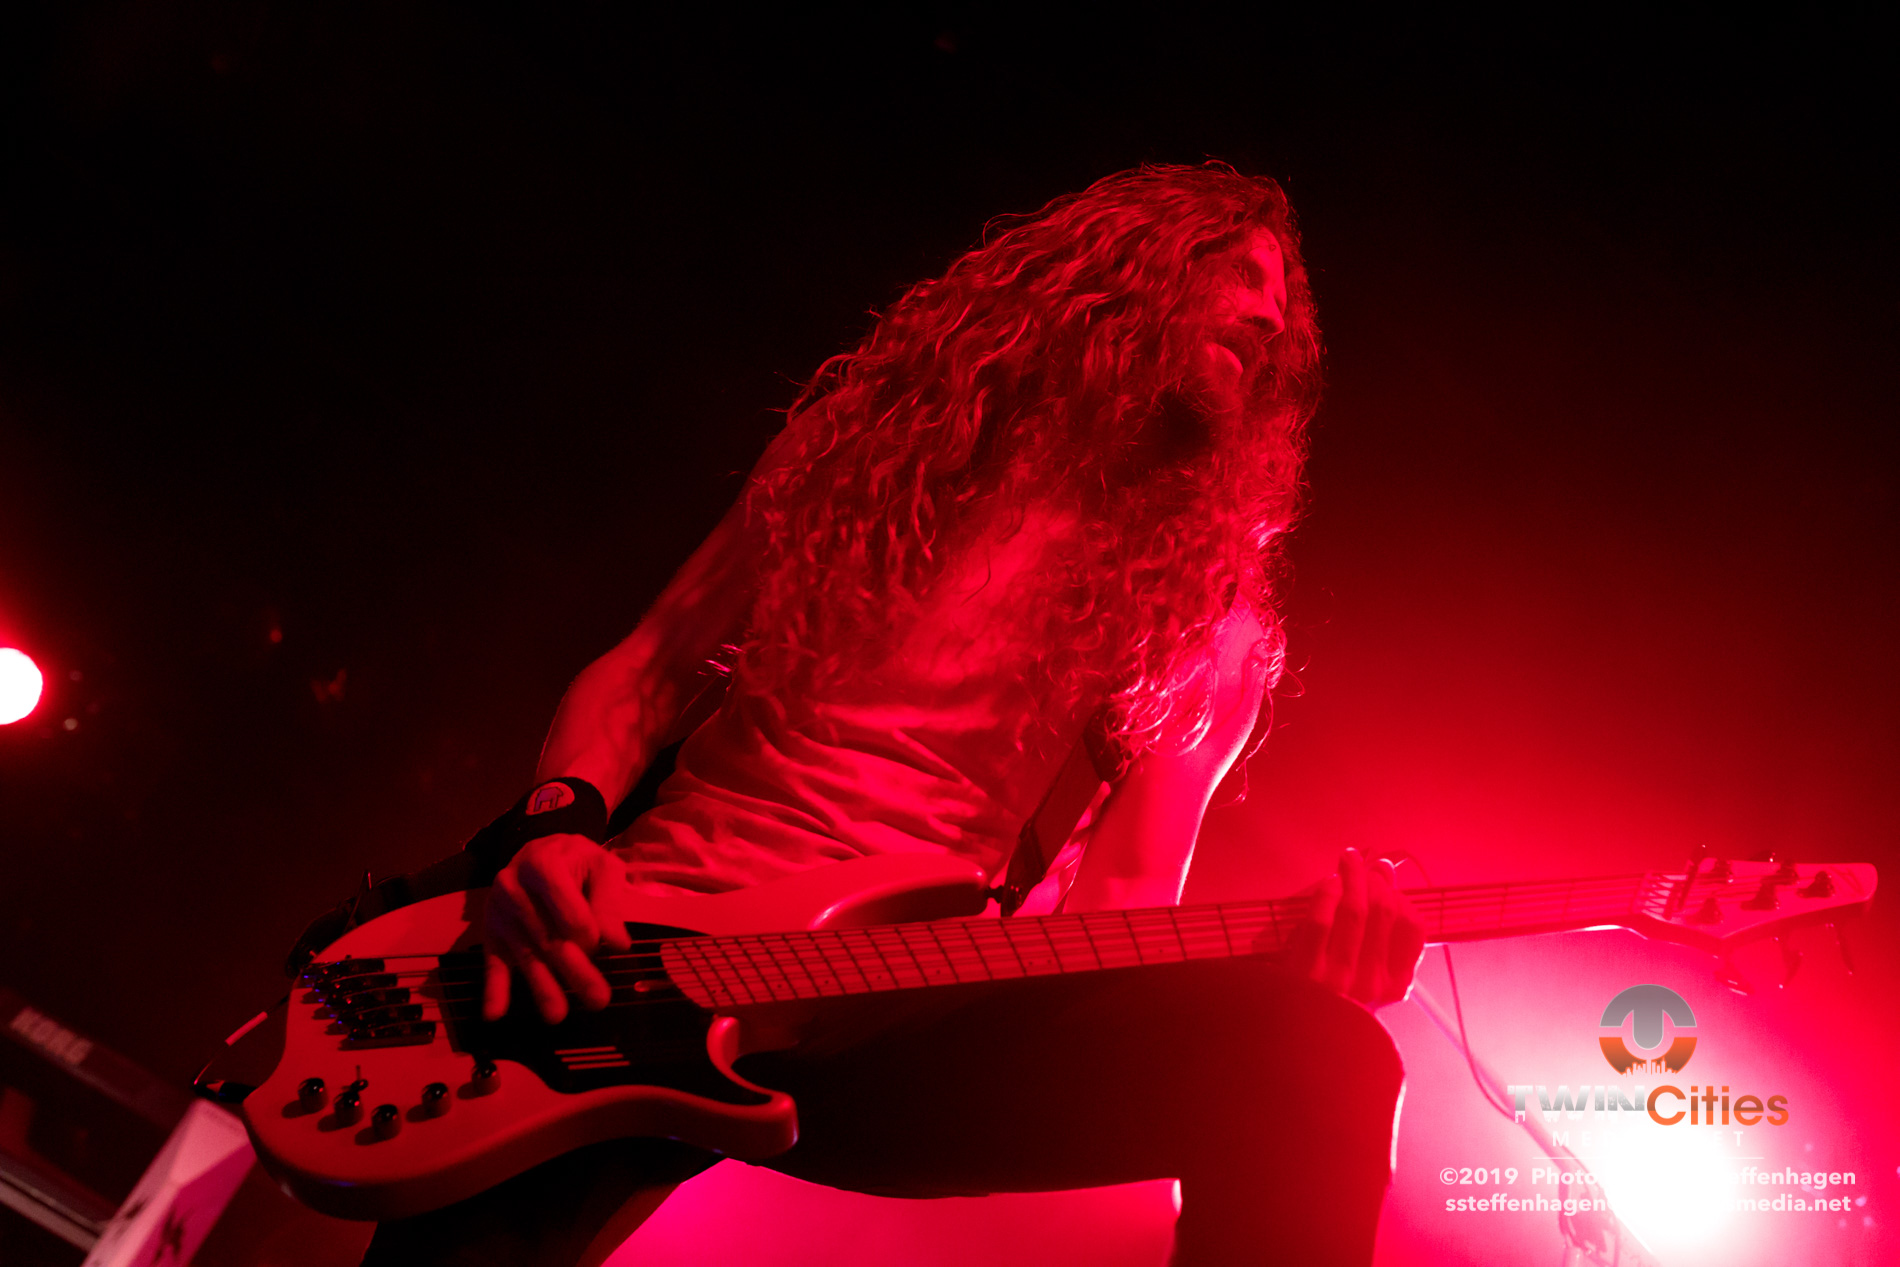 September 30, 2019 - Minneapolis, Minnesota, United States - Delain live in concert at The Cabooze along with Amorphis and Anneke Van Giersbergen as the openers.

(Photo by Seth Steffenhagen/Steffenhagen Photography)